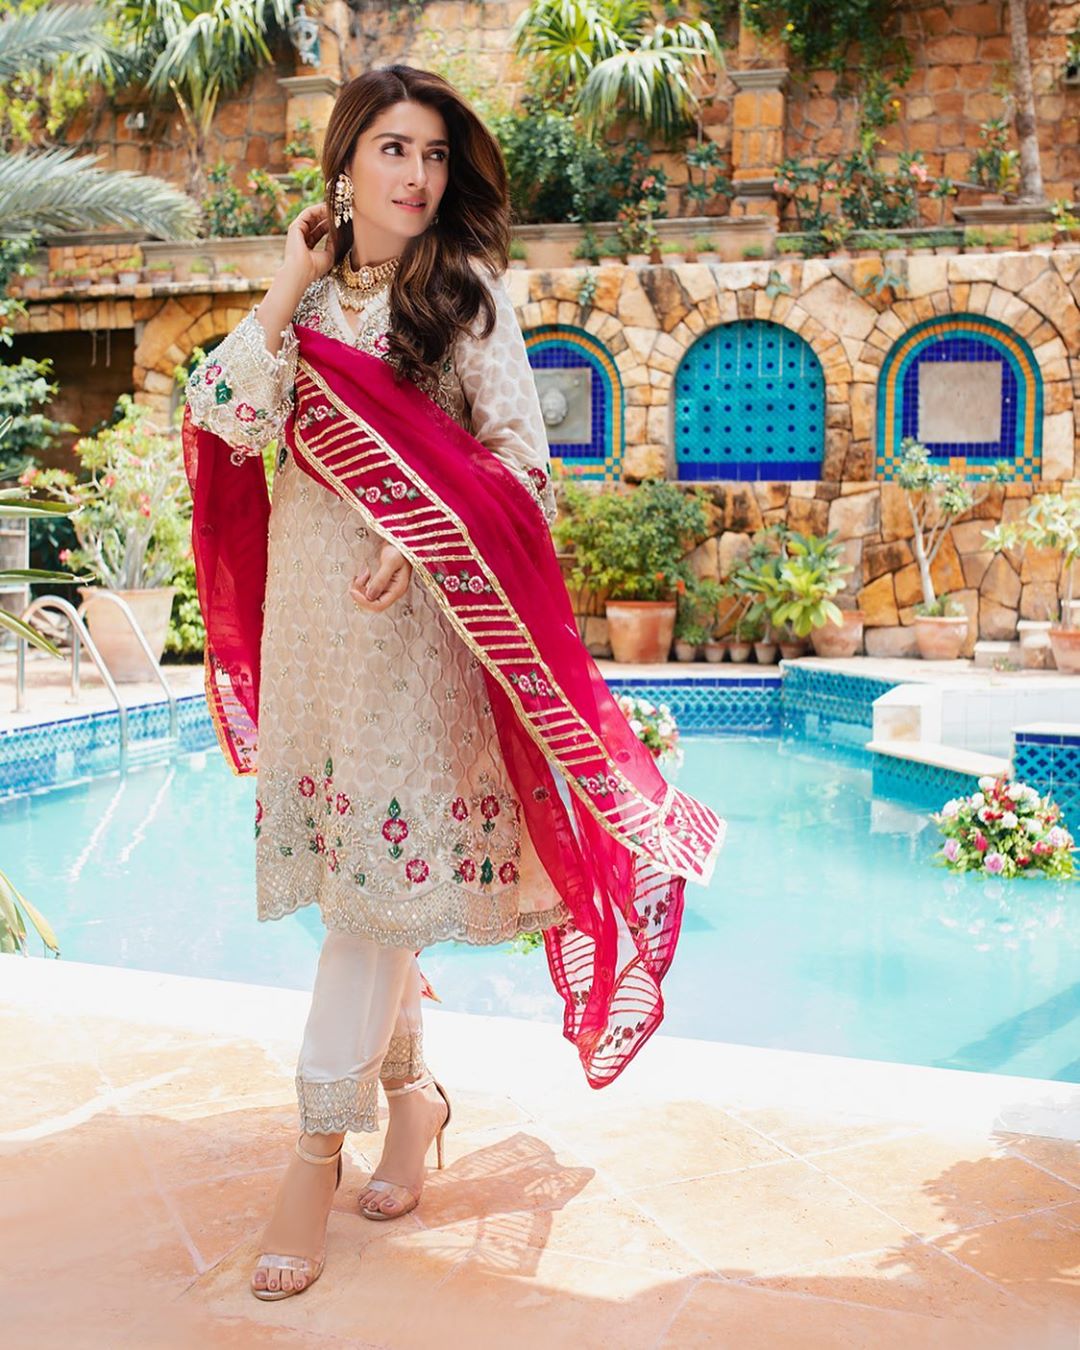 Ayeza Khan Looking Gorgeous in Latest Shoot for RJ’s Pret